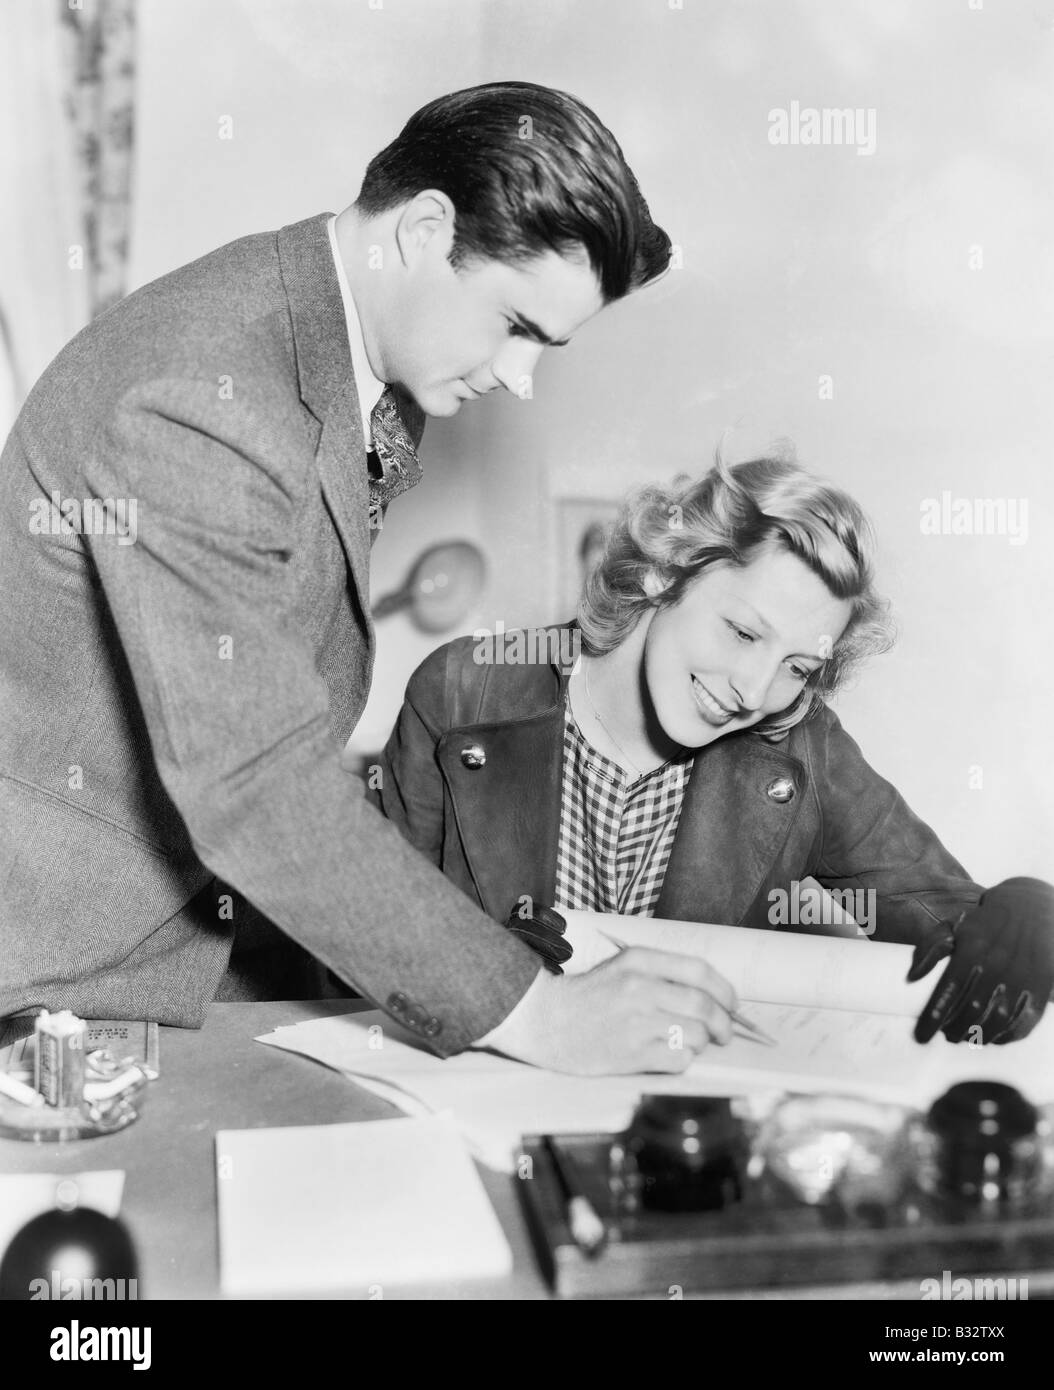 Couple reading a document together Stock Photo